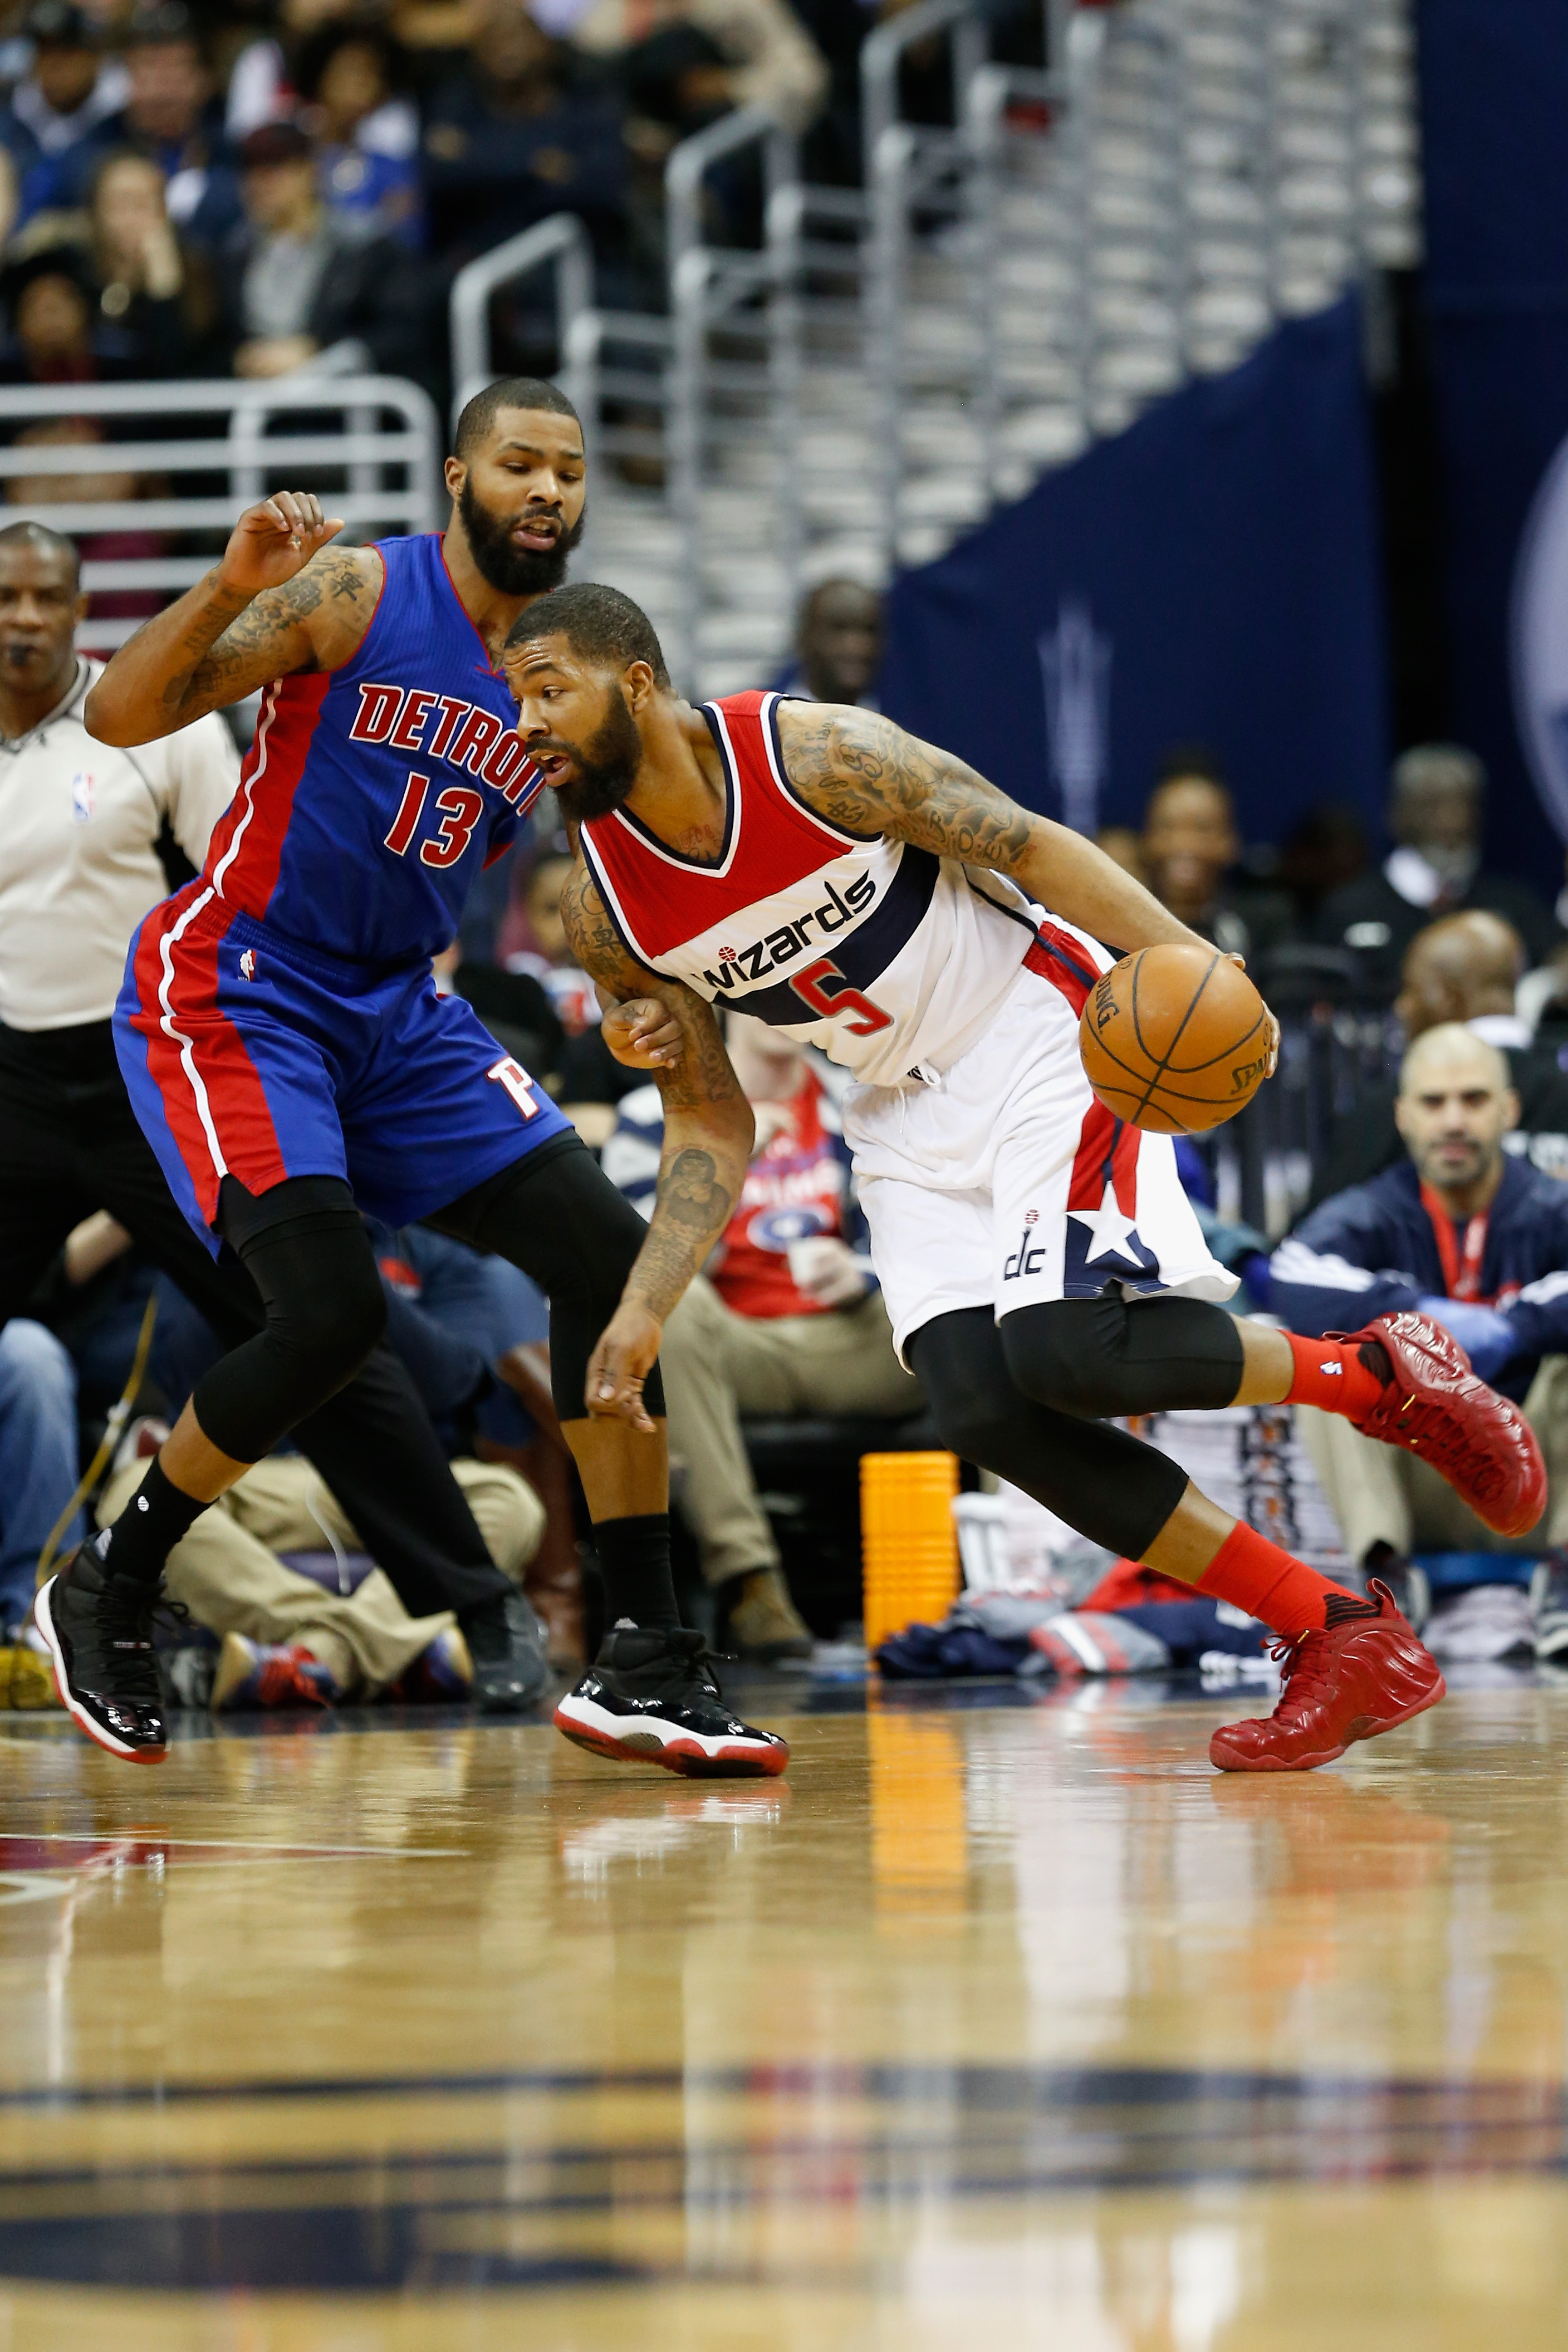 Wizards’ momentum comes down to Morris trade